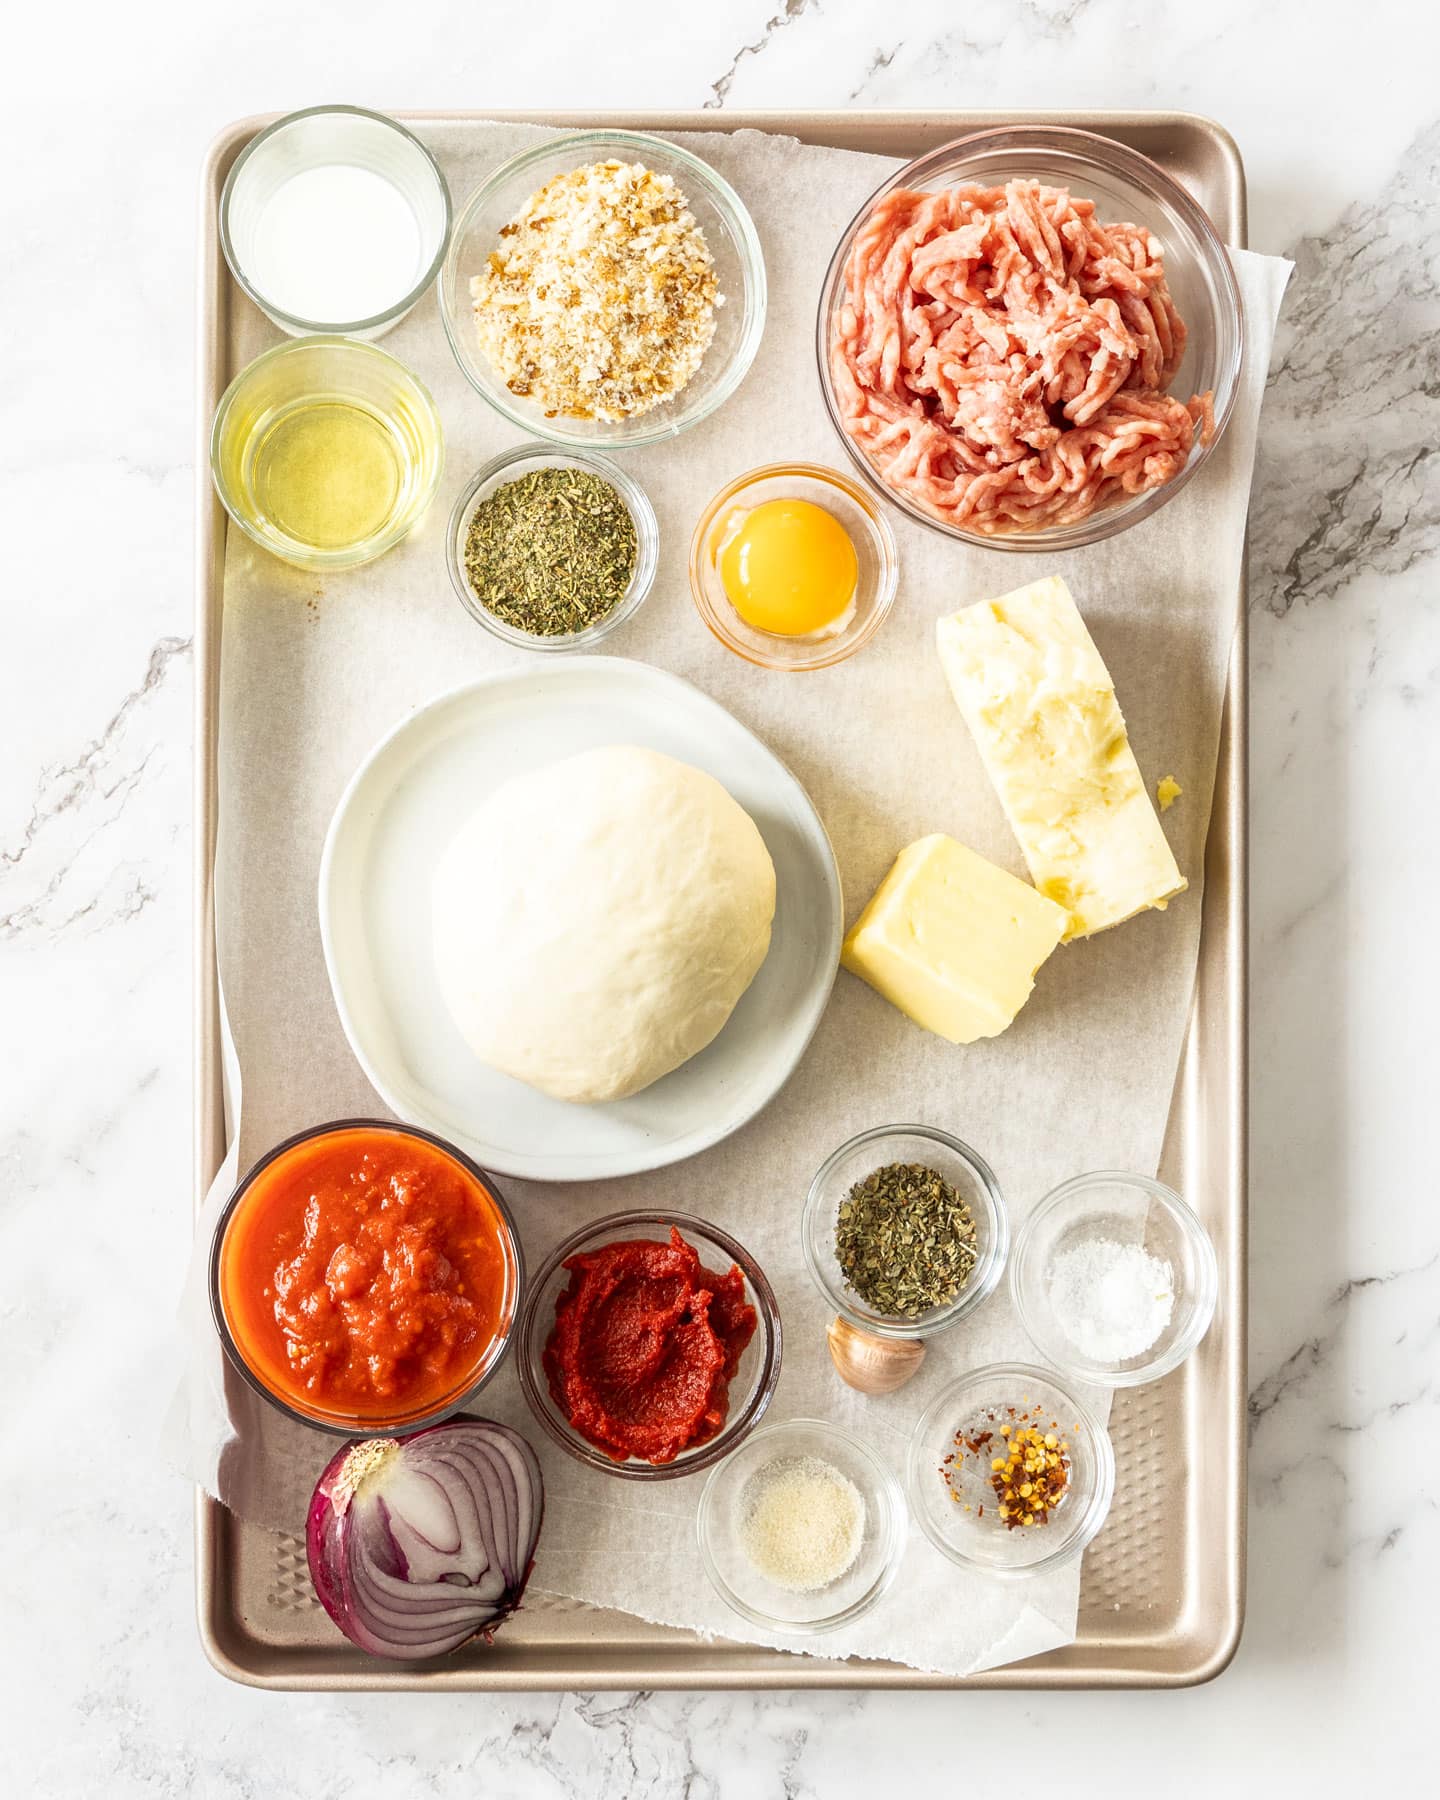 Ingredients for meatball pizza on a baking tray.